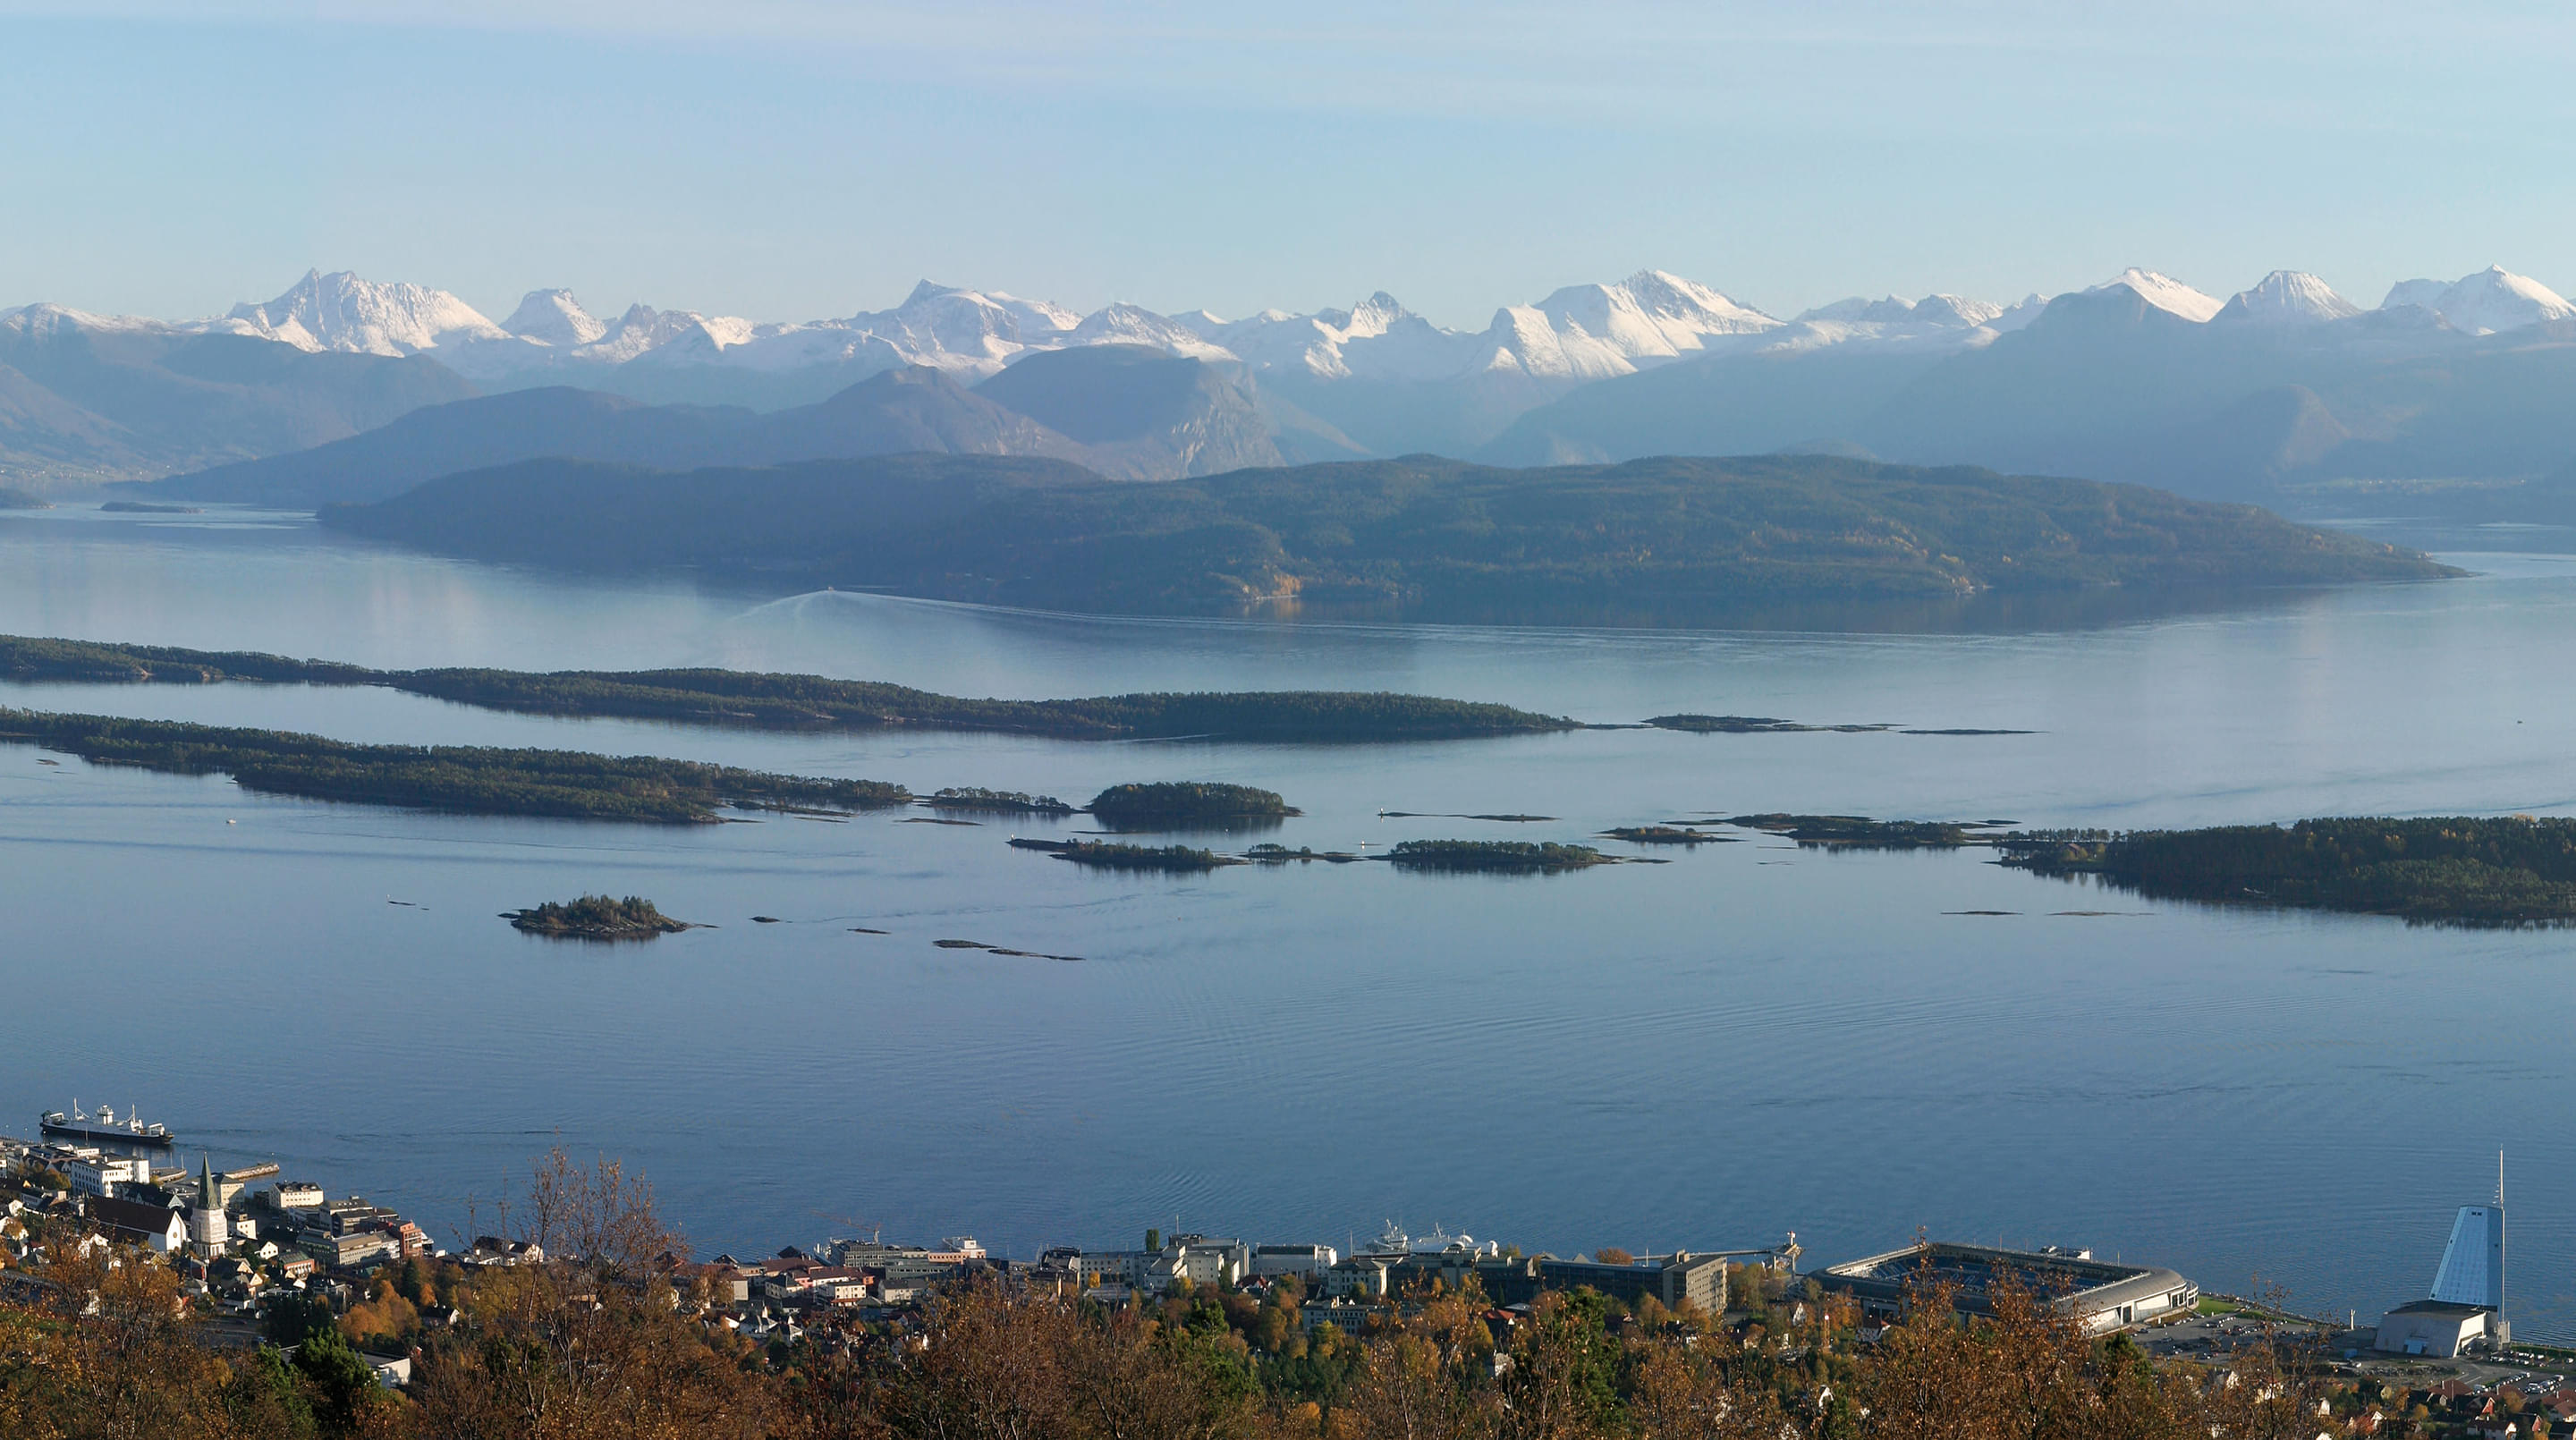 Trail Head to Varden Molde Panorama Overview